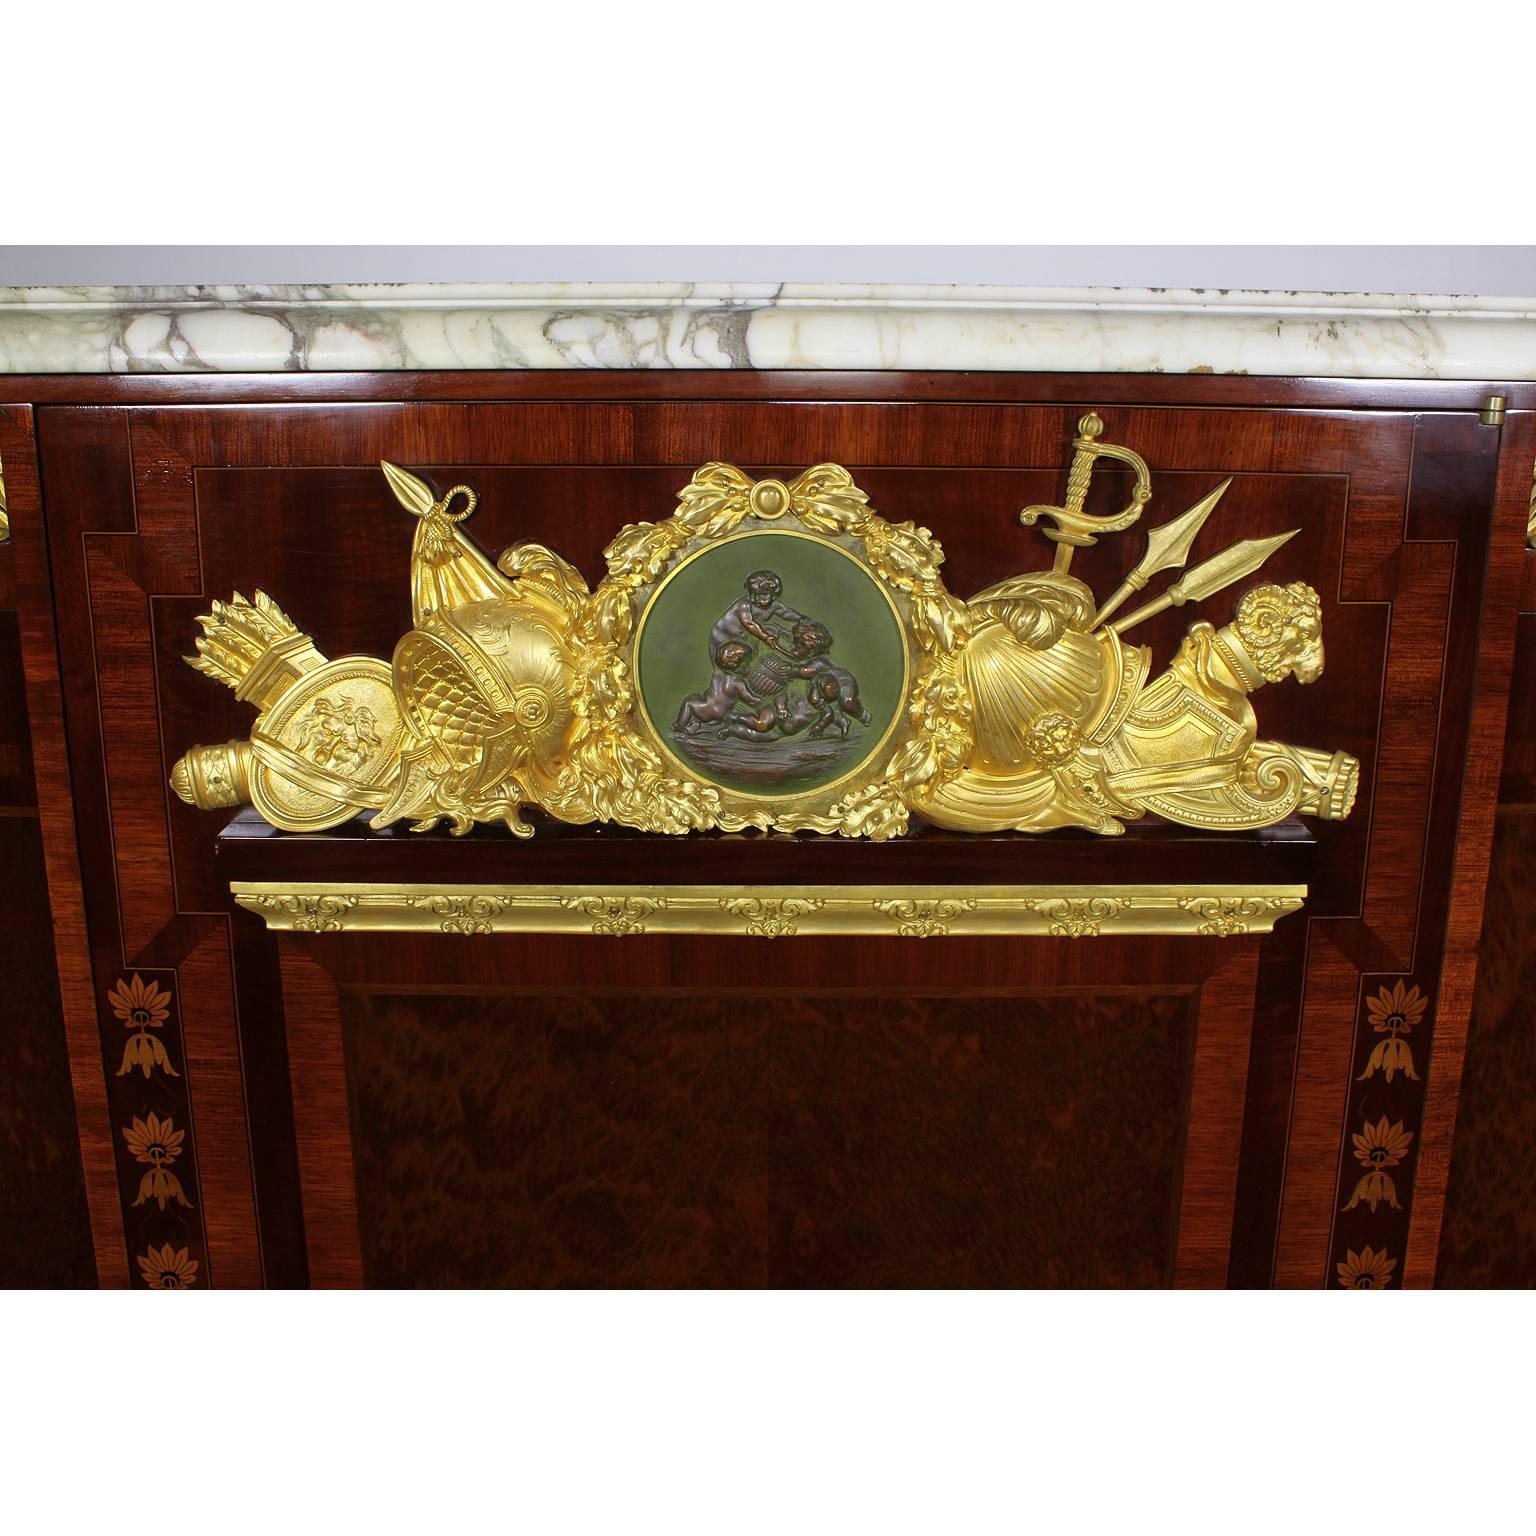 A very fine French 19th century Louis XVI style burr-walnut and mahogany marquetry and ormolu-mounted Military armorial Meuble D'Appui with a Veined Brèche Violette marble top, attributed to Mâison Millet, Paris. The tall and narrow three-door